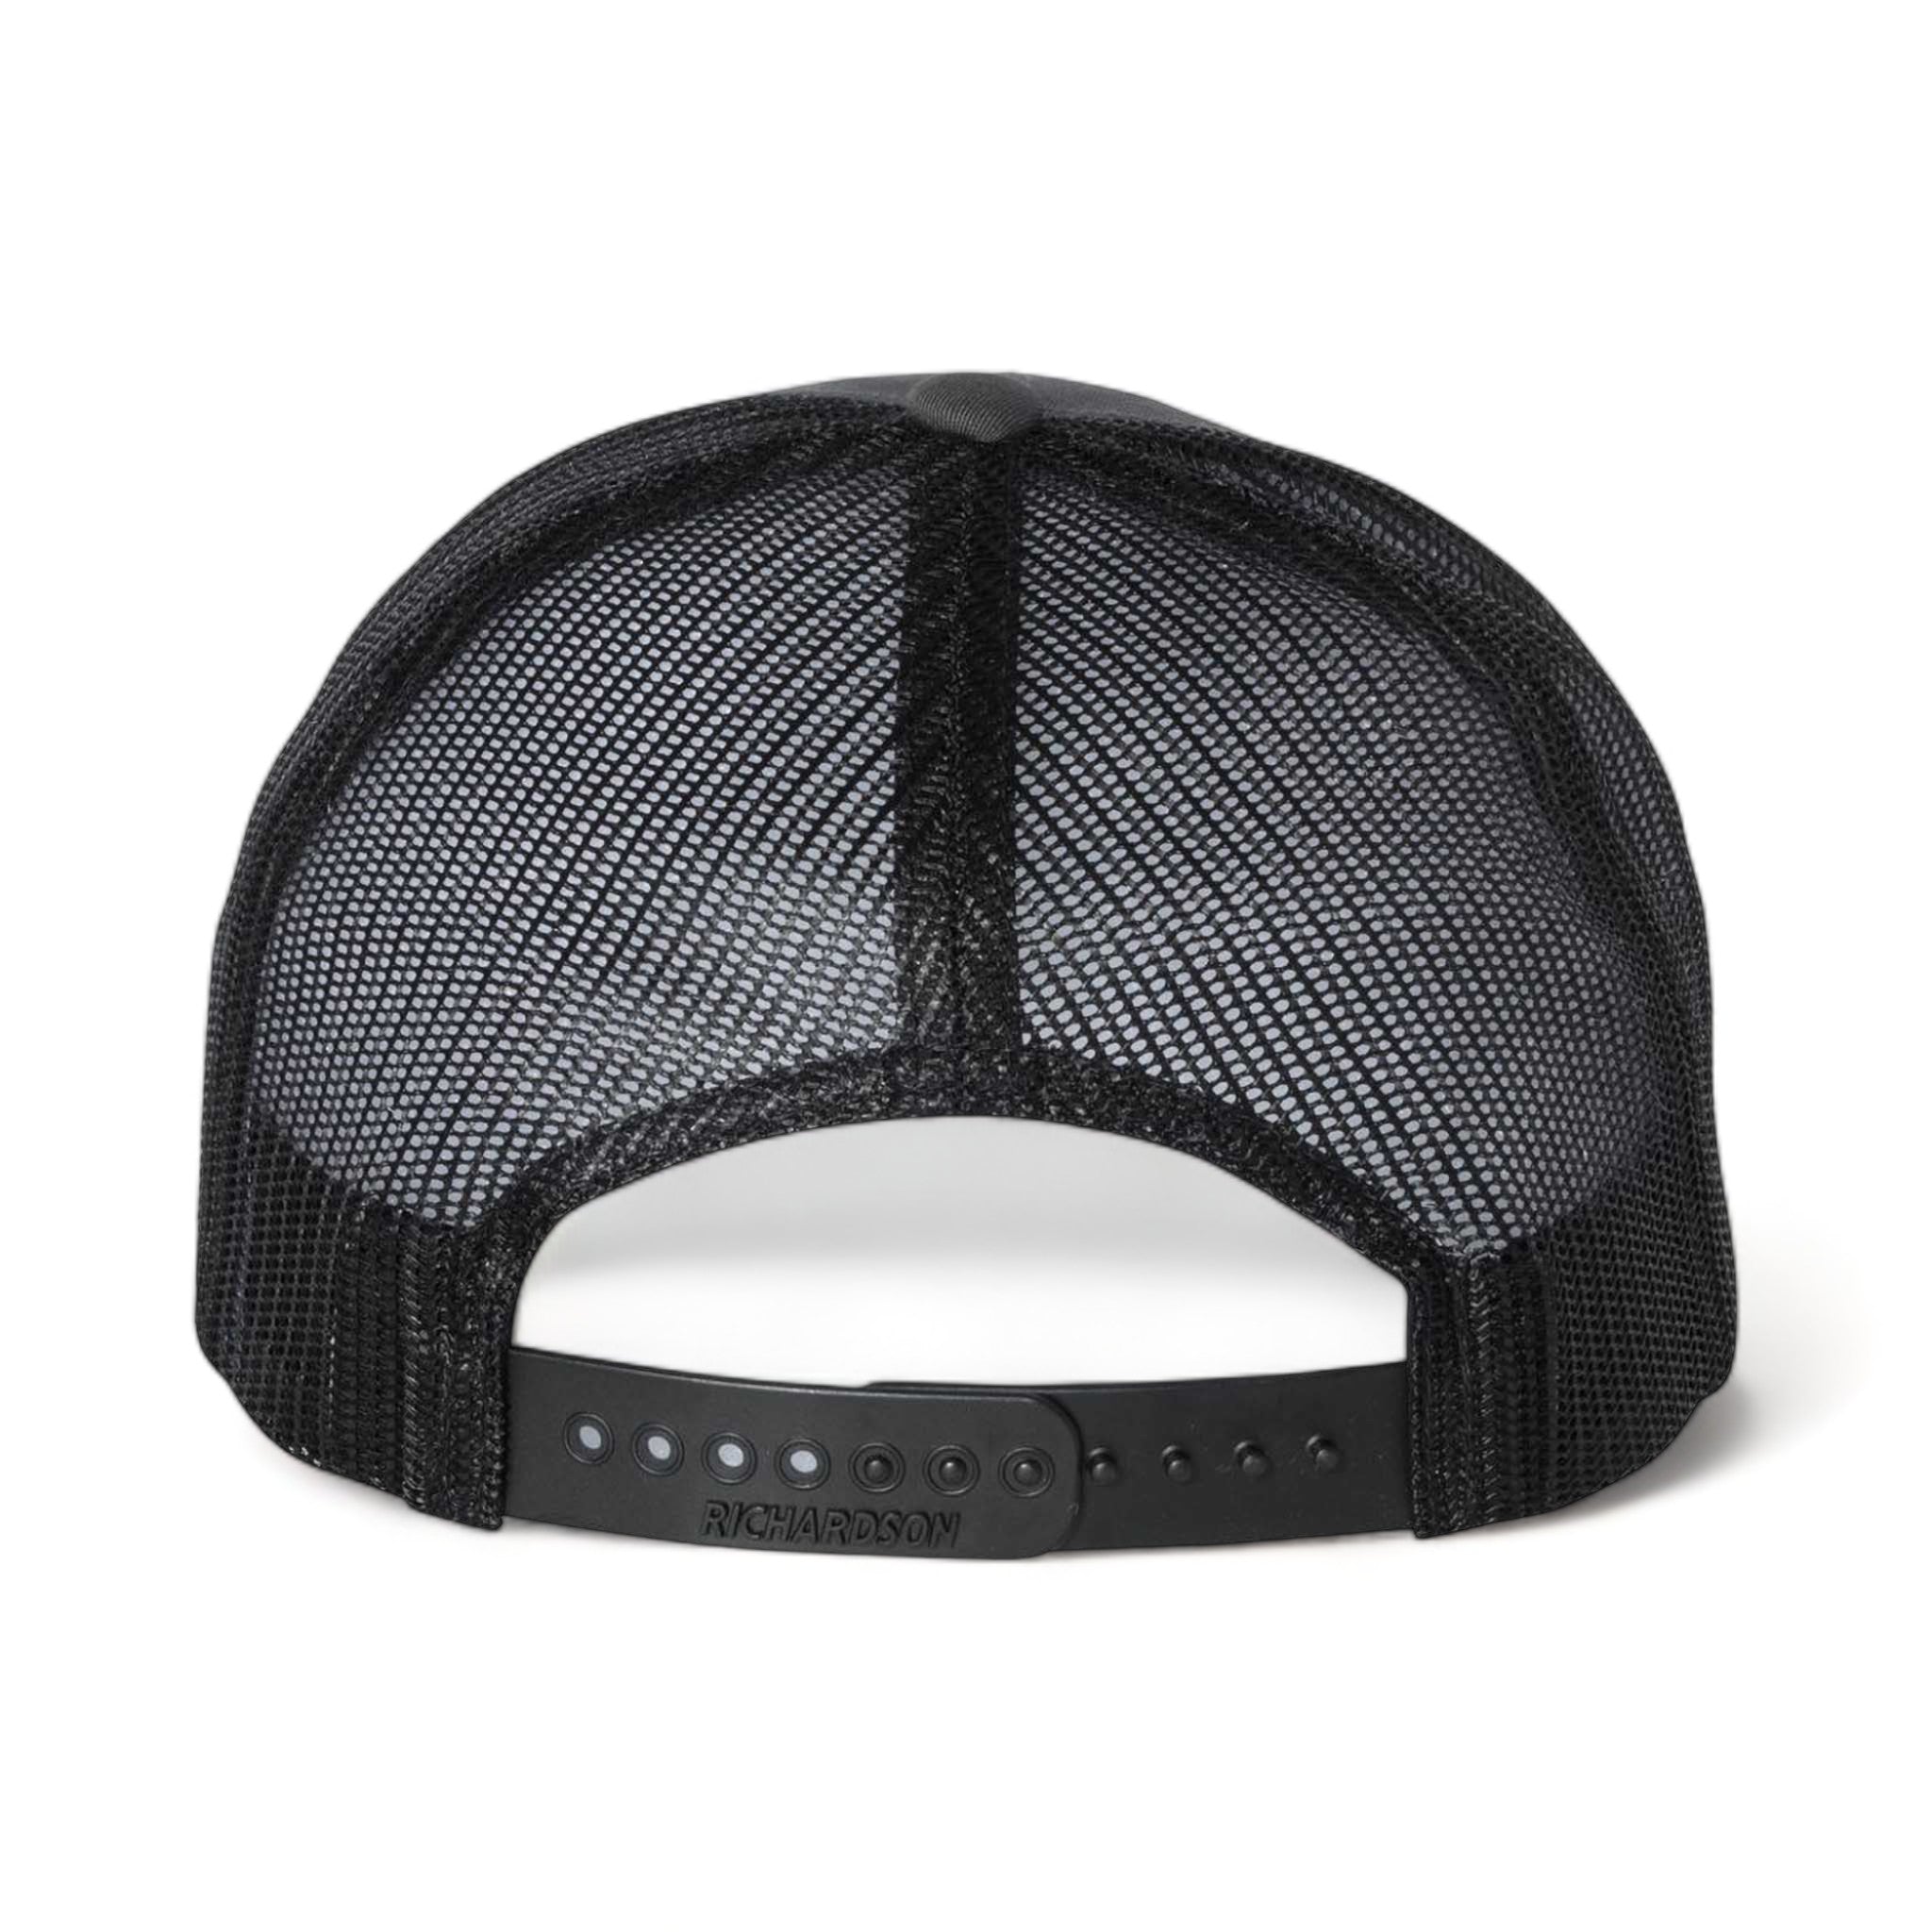 Back view of Richardson 115 custom hat in charcoal and black